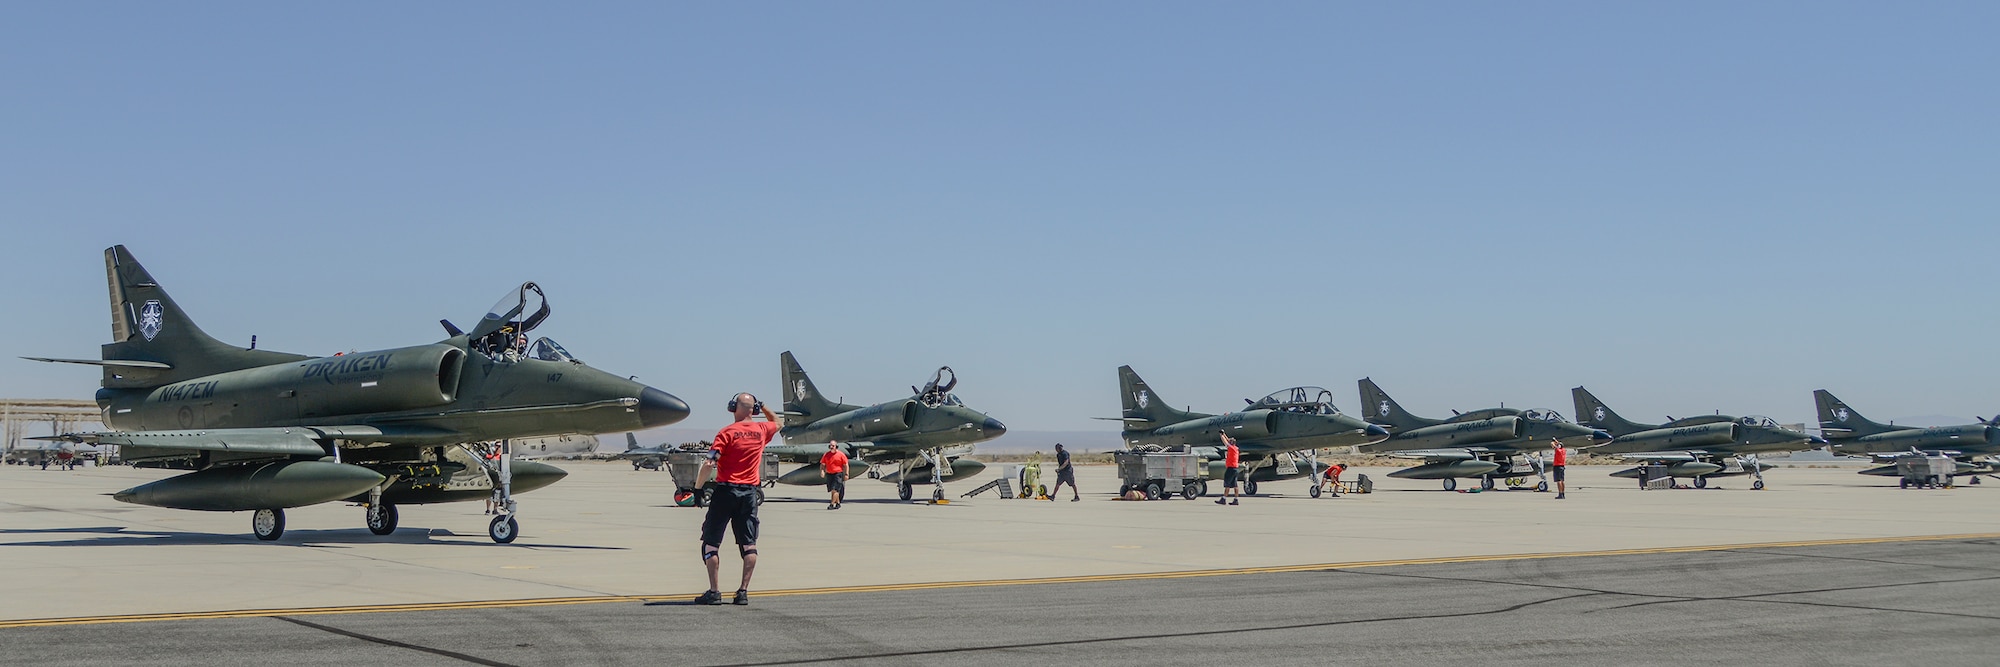 Four Draken A-4s prepare for flight Aug. 21, while the other two stay behind on the flightline. (U.S. Air Force photo by Rebecca Amber)